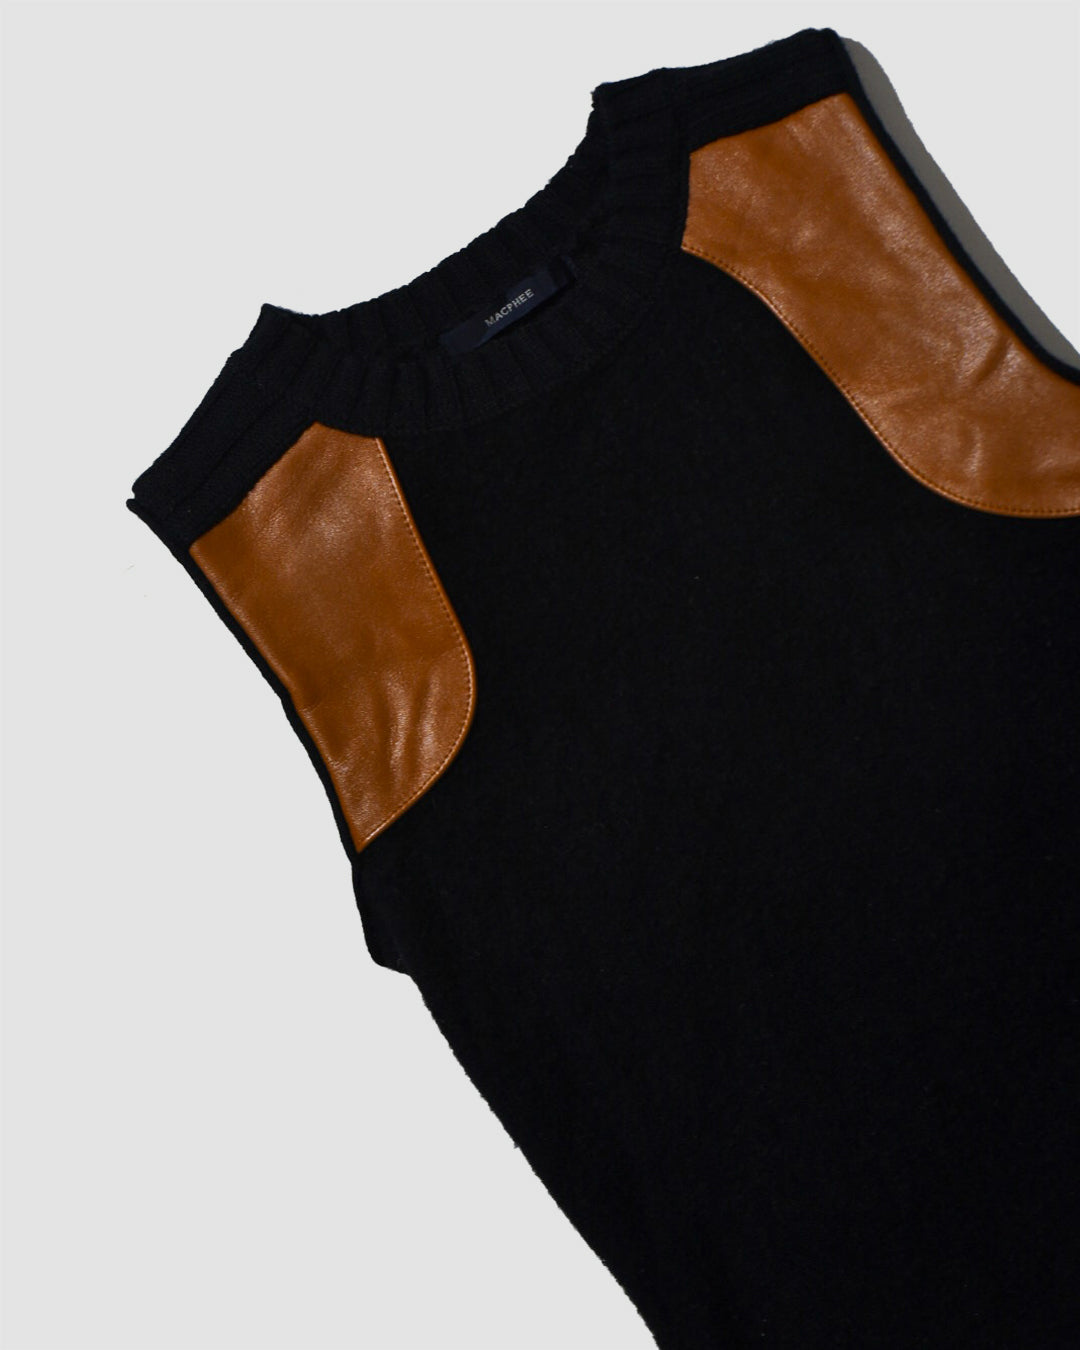 MACPHEE LEATHER PATCH SLEEVELESS TOP - S